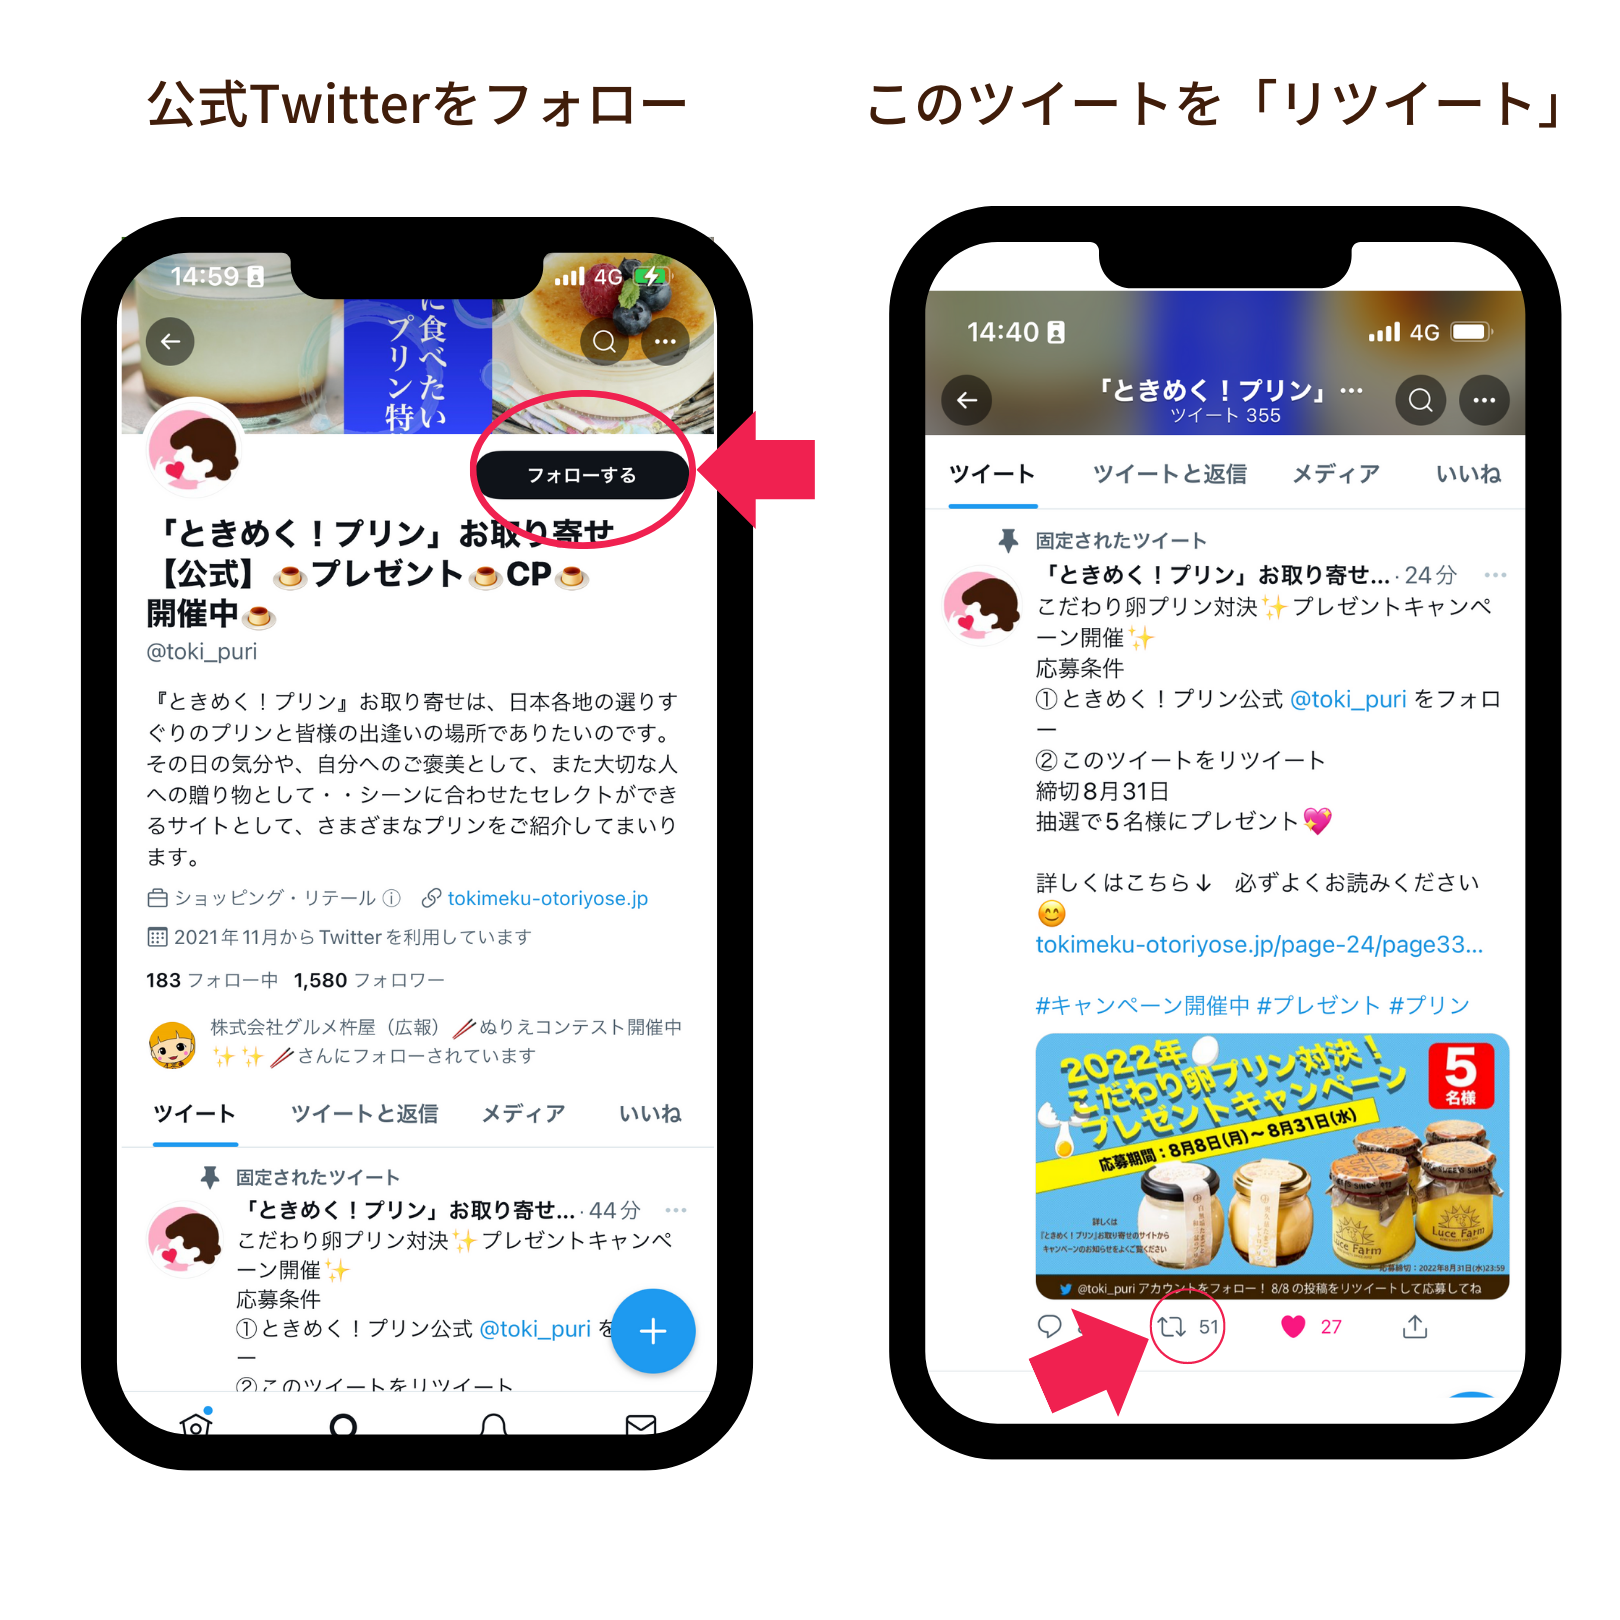 Twitter0822.png?1659940081654